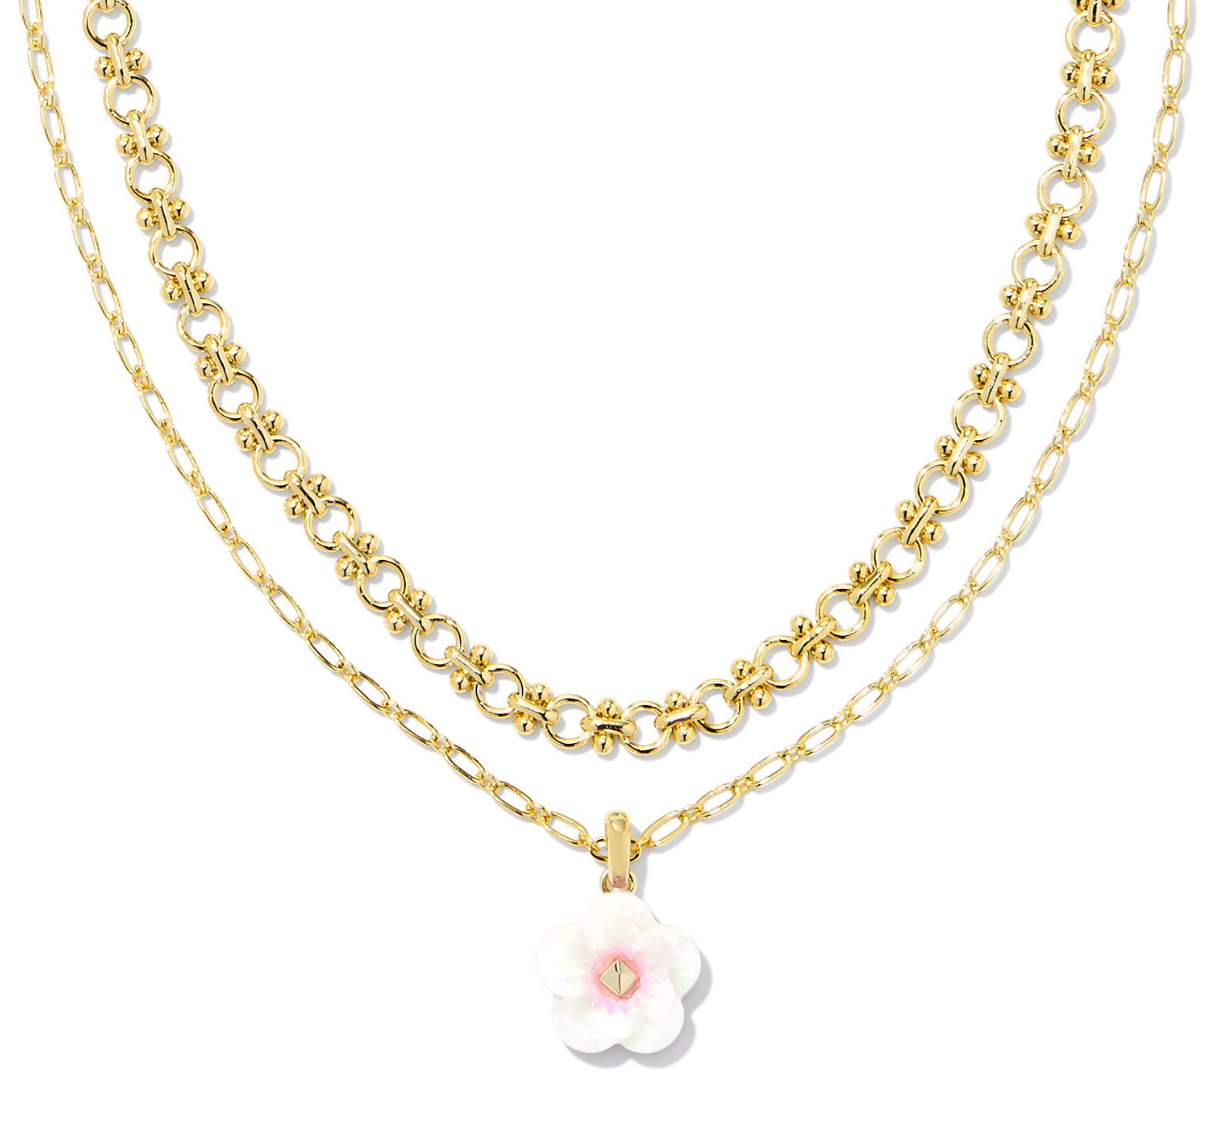 Deliah Gold Multi Strand Necklace in Iridescent Pink White Mix | KENDRA SCOTT - The Street Boutique 